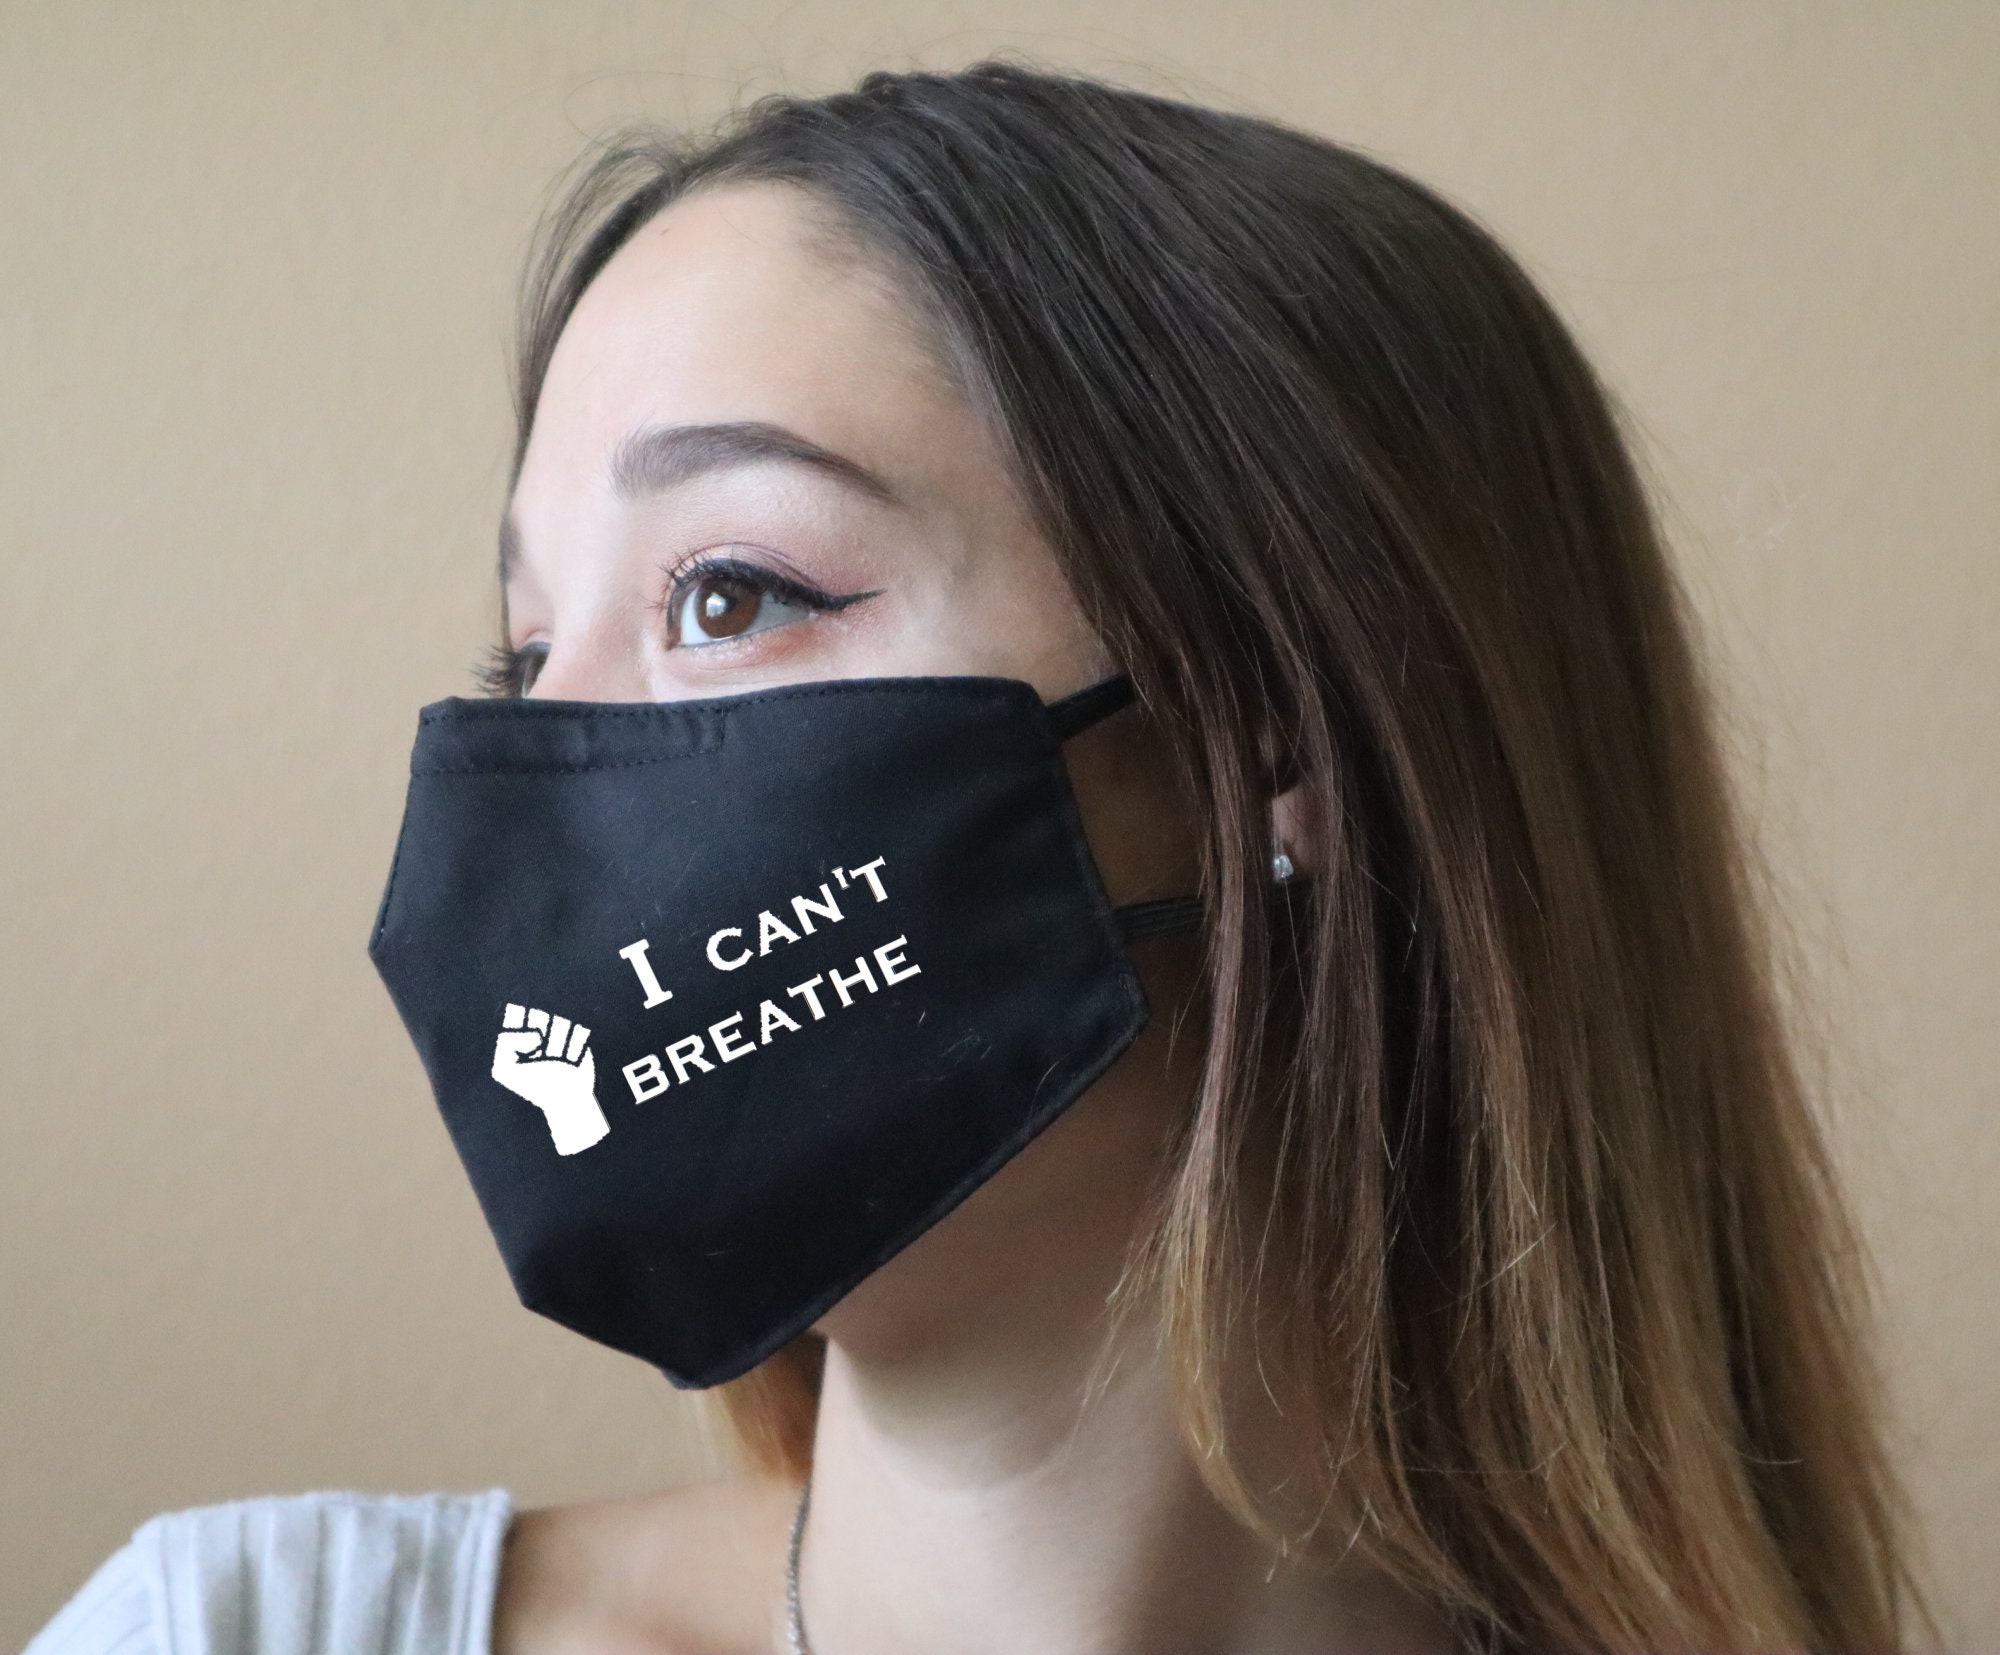 Handmade Cotton Blend Customizable Face Masks With Adjustable Ear-Loops - I Can't Breath Adult Small 8 X 5"